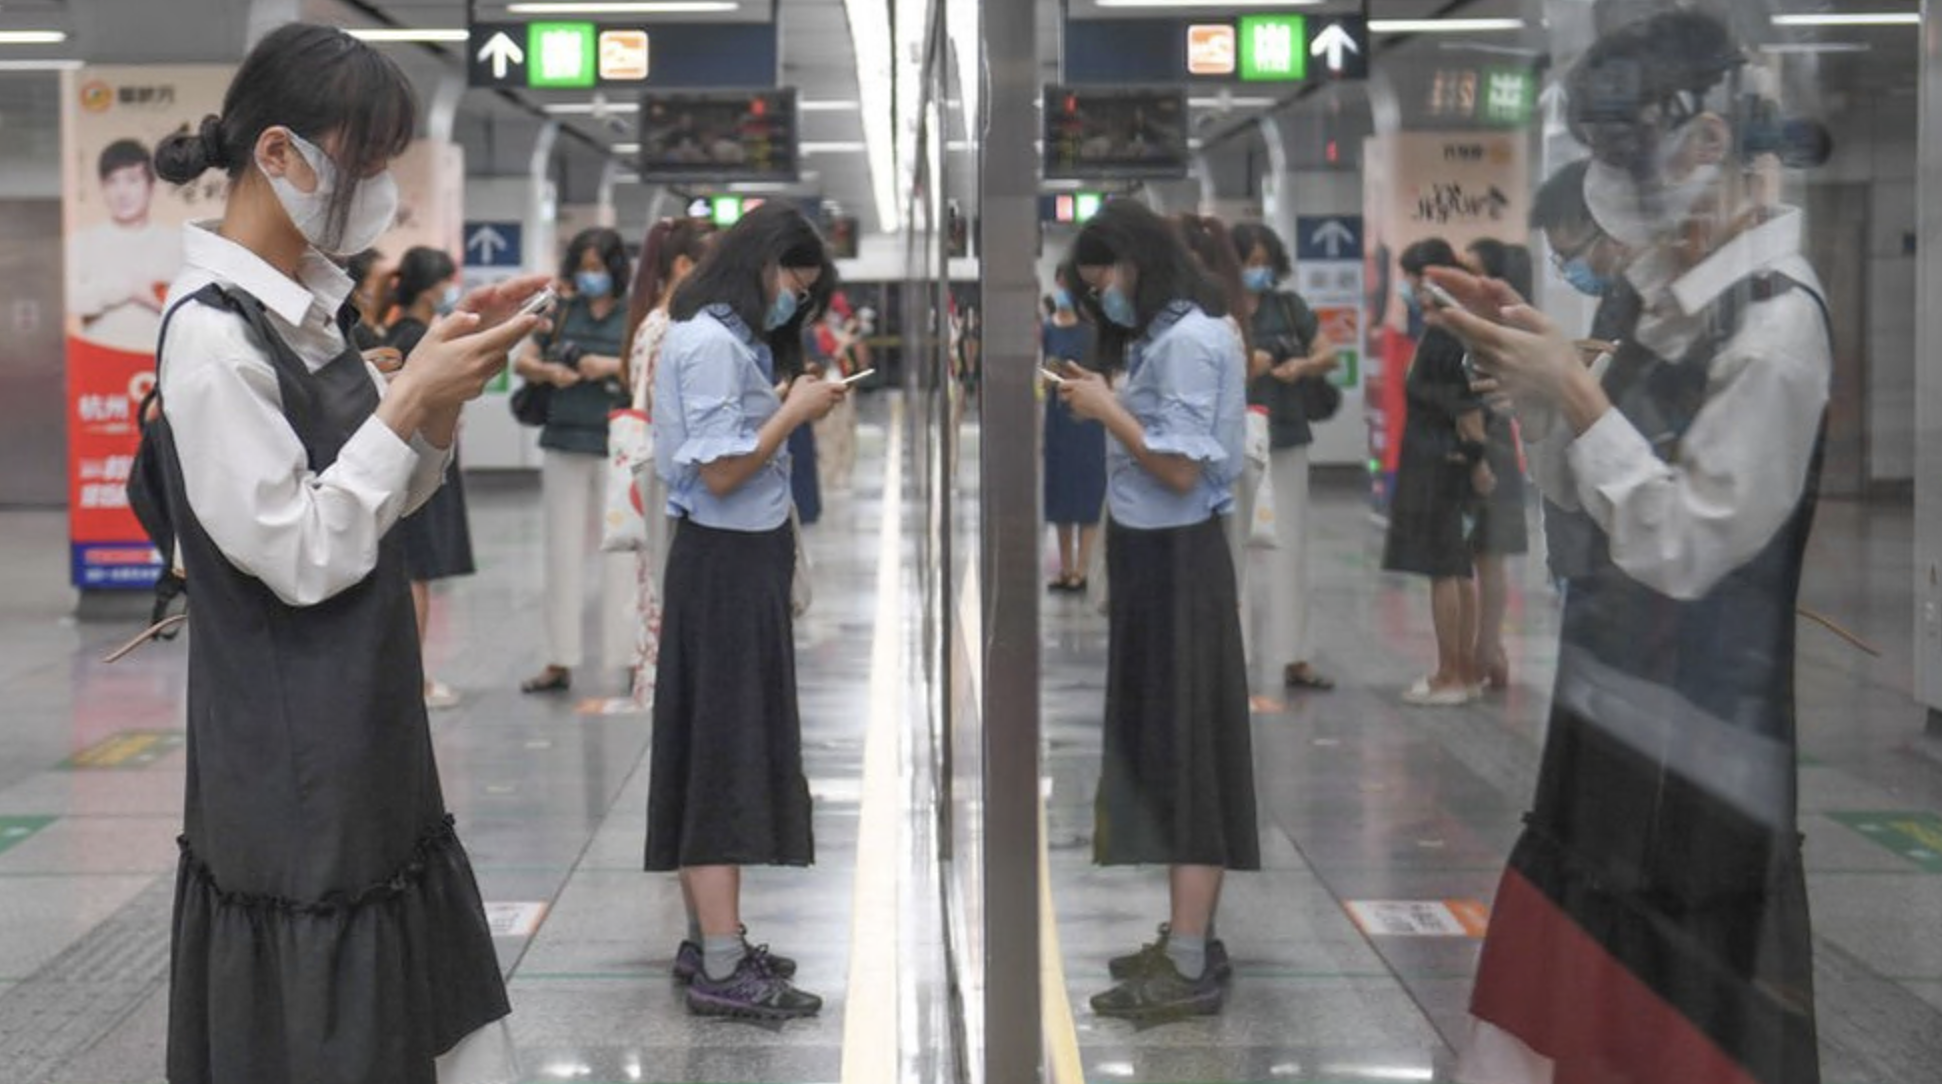 Passengers looking at their smartphones in a subway station in China